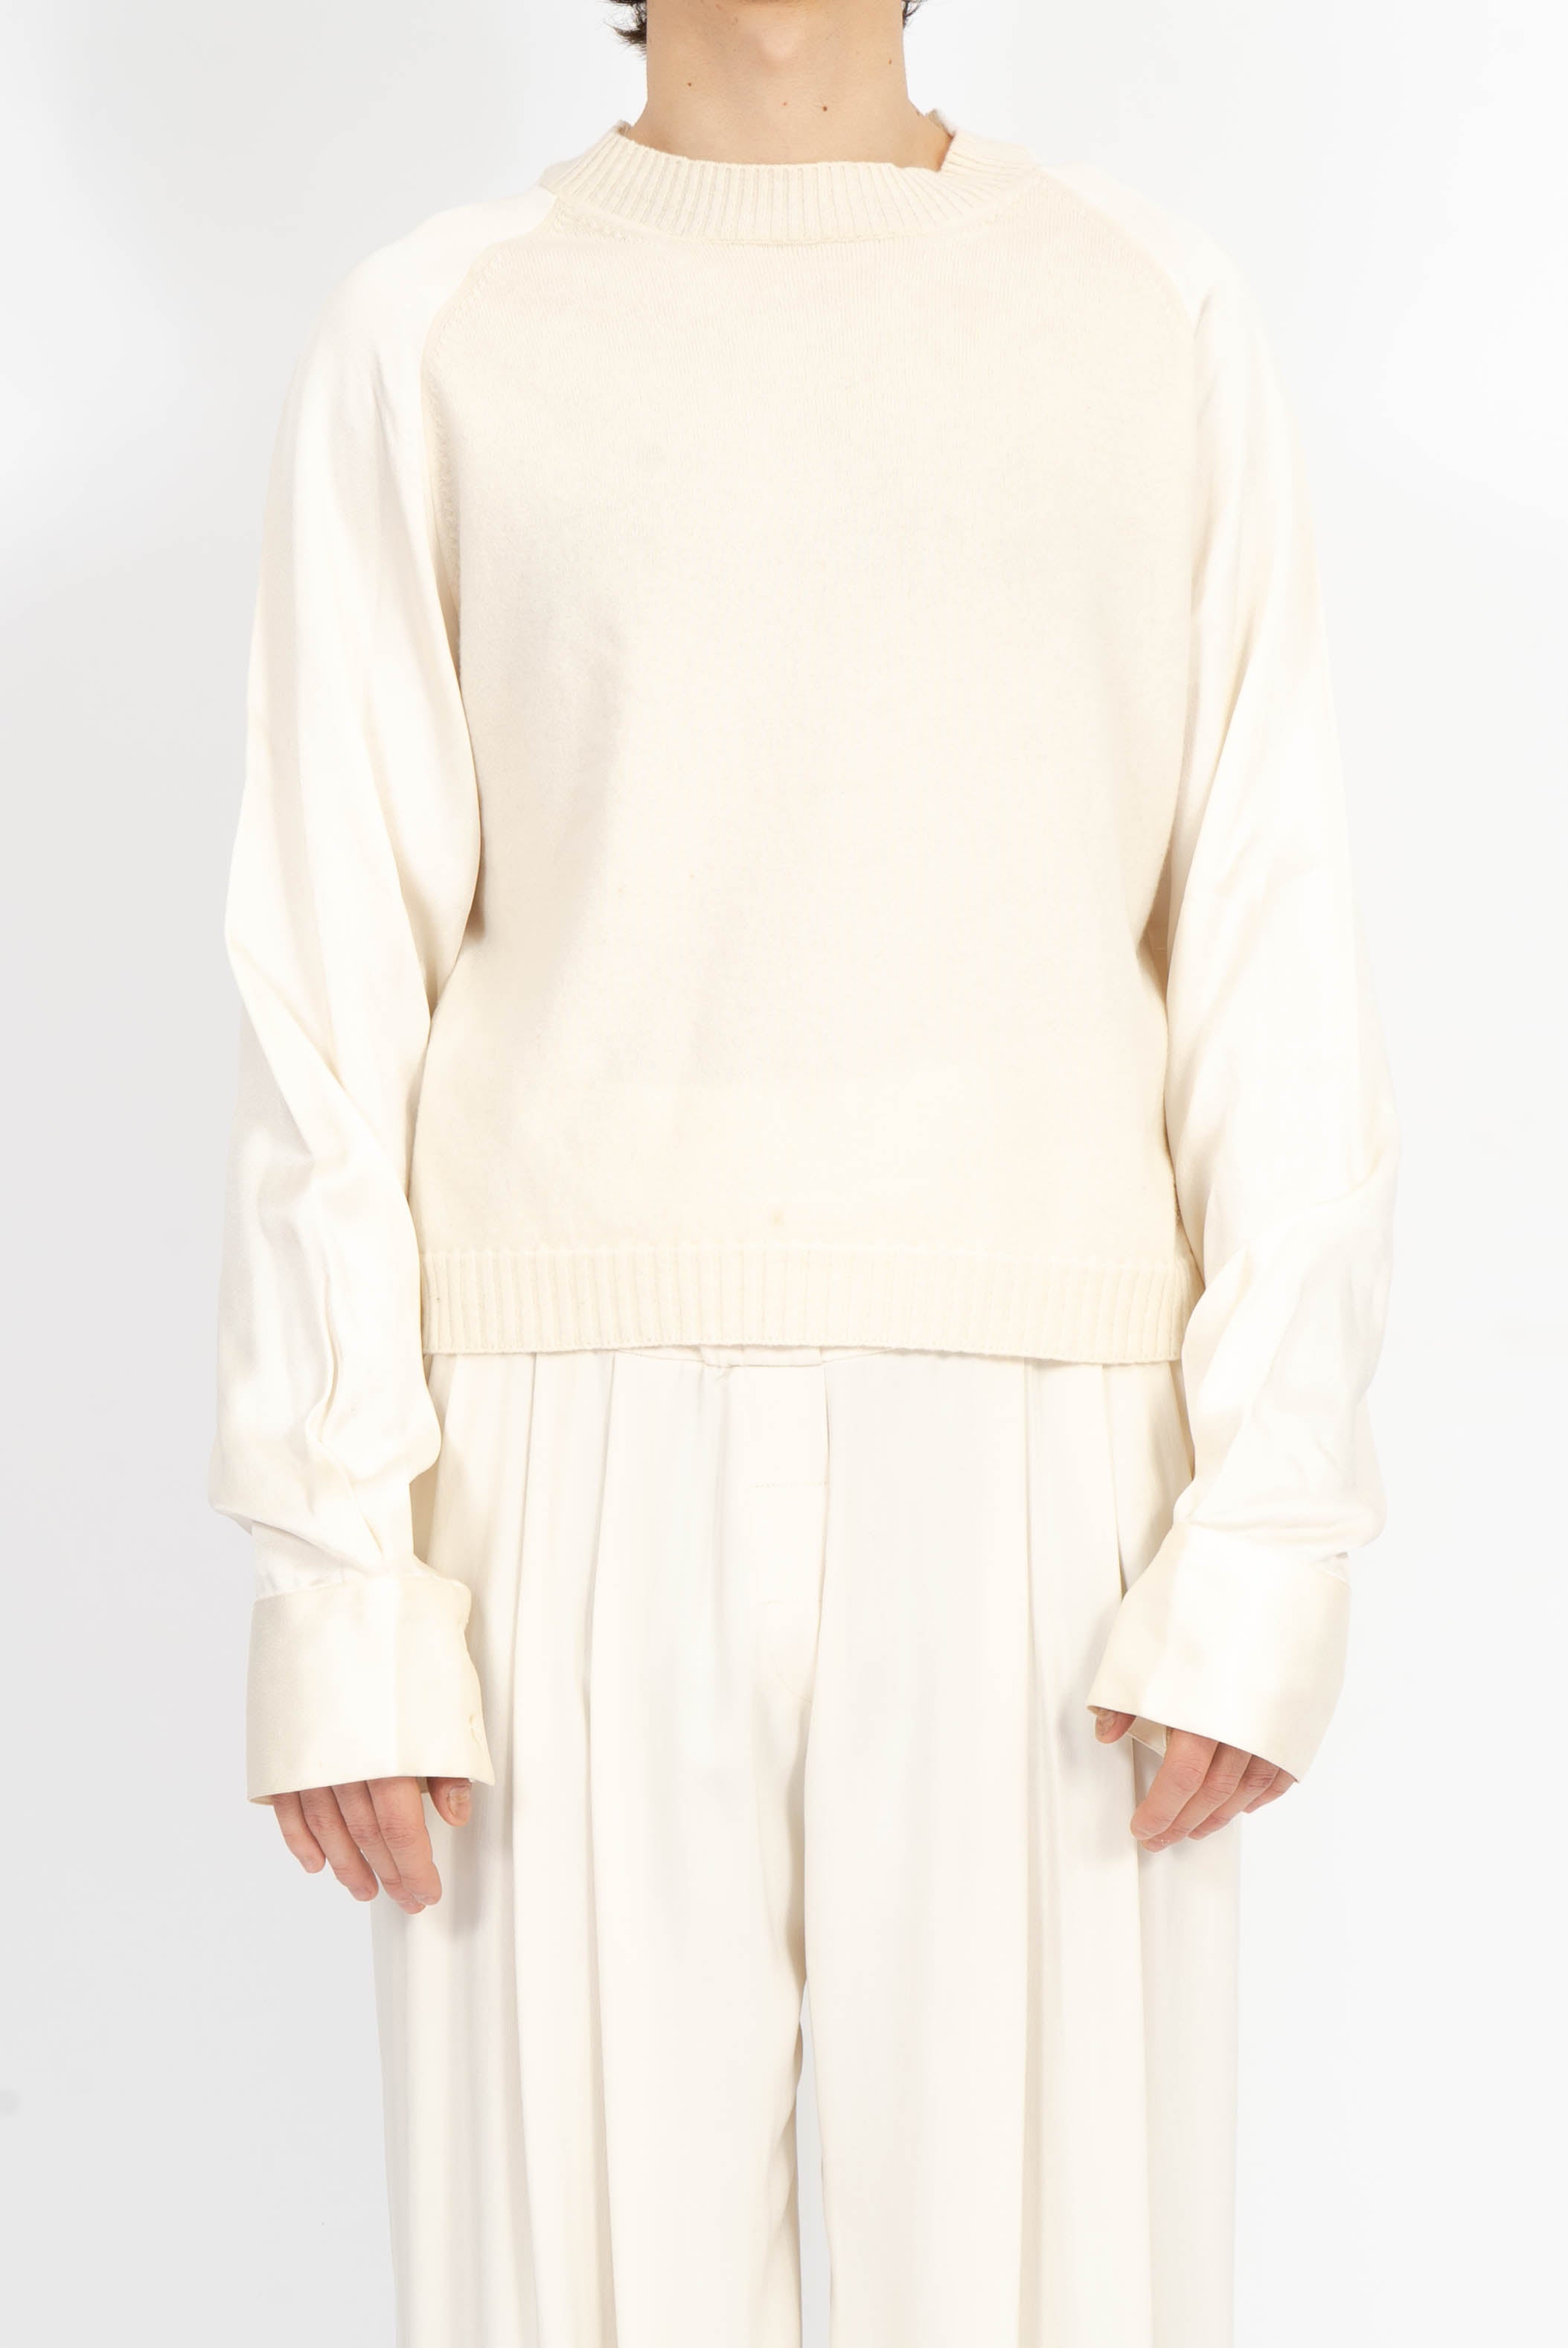 SS18 Knit with Satin Sleeves Ivory